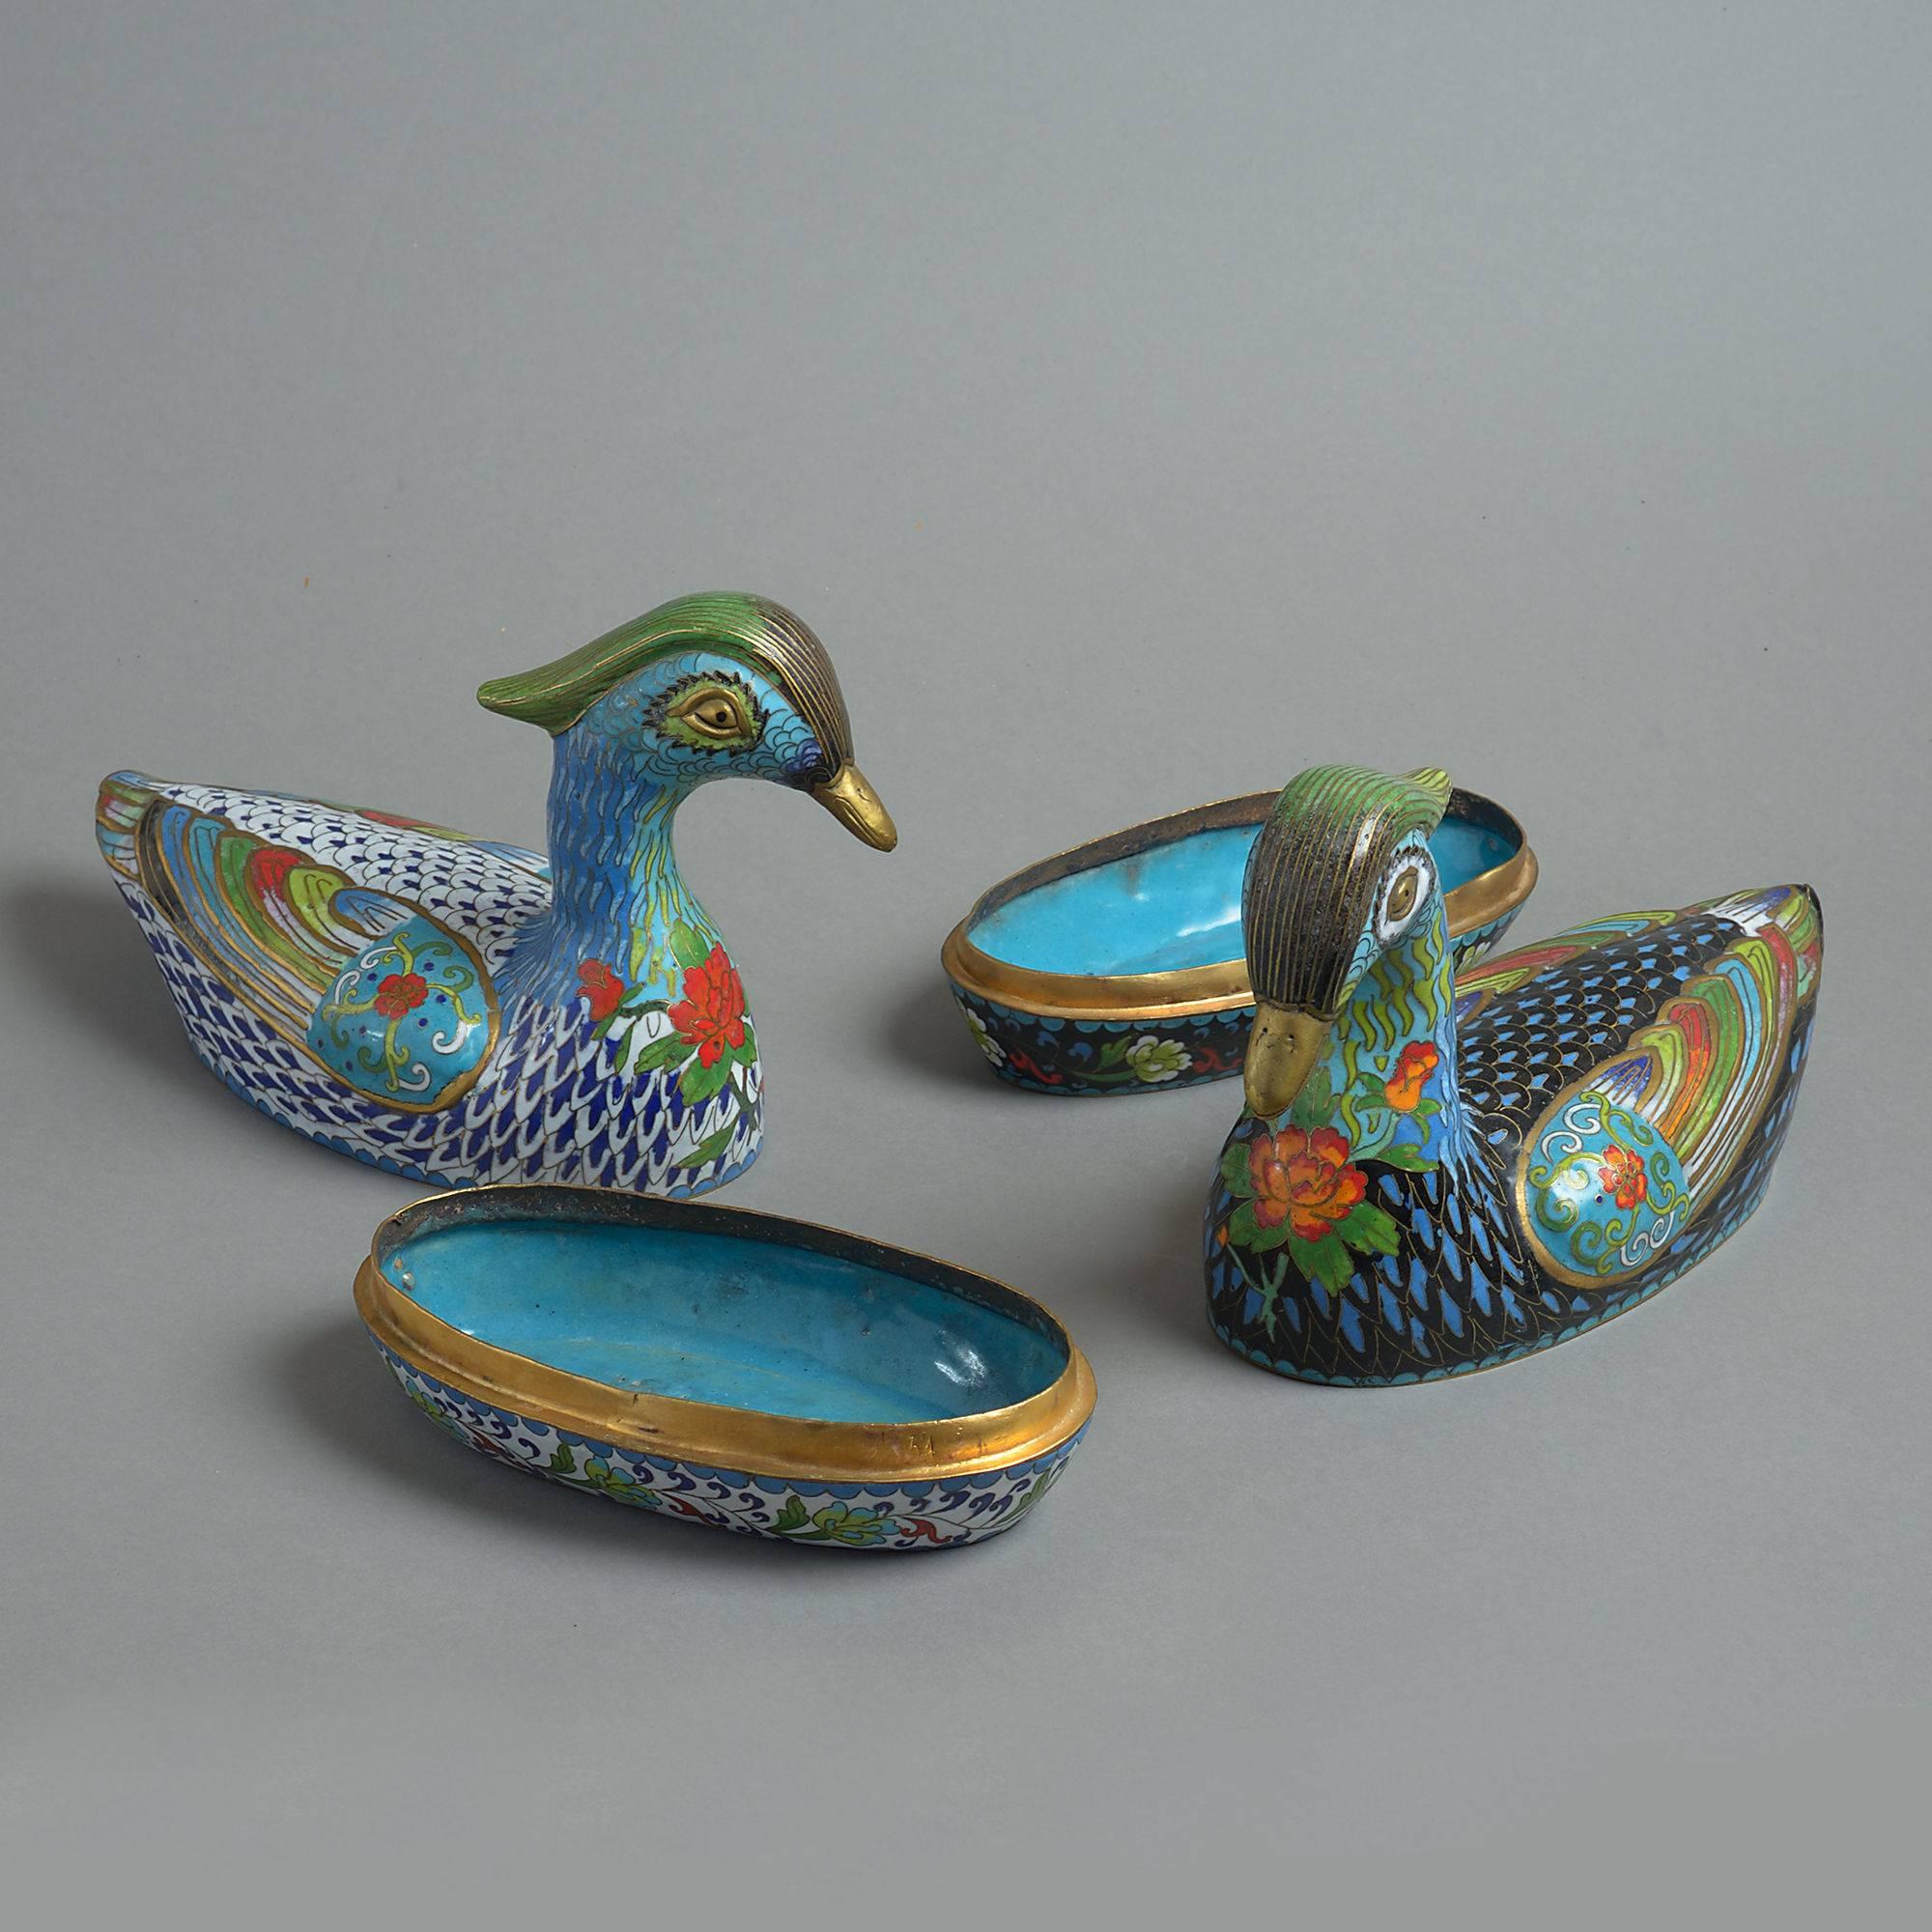 A early 20th century pair of cloisonné boxes taking the form of ducks, the lids lifting to reveal turquoise enameled interiors.